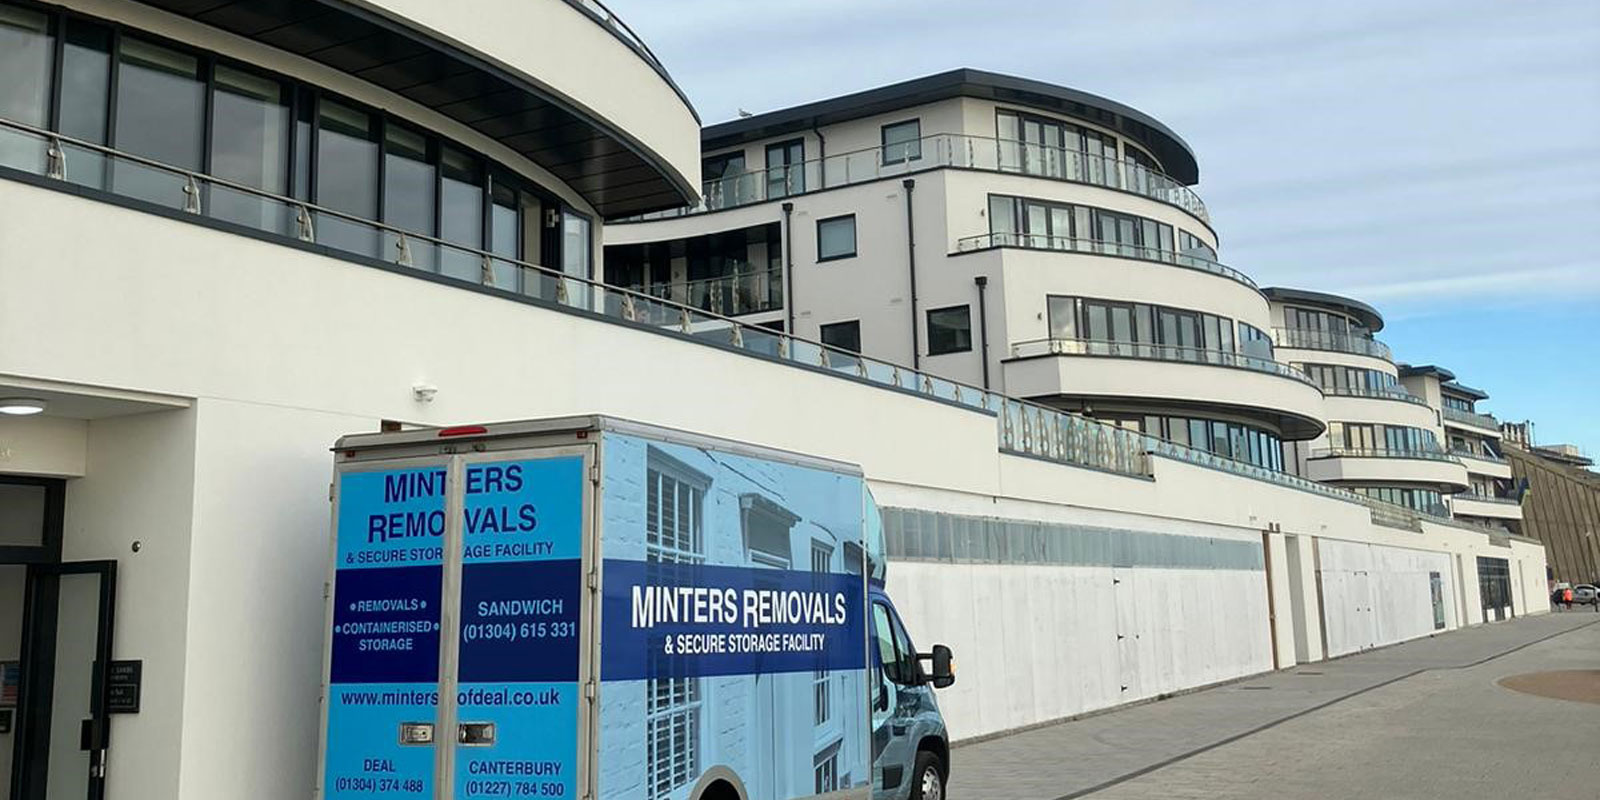 Removals to and from Dover, Kent - Minters Of Deal